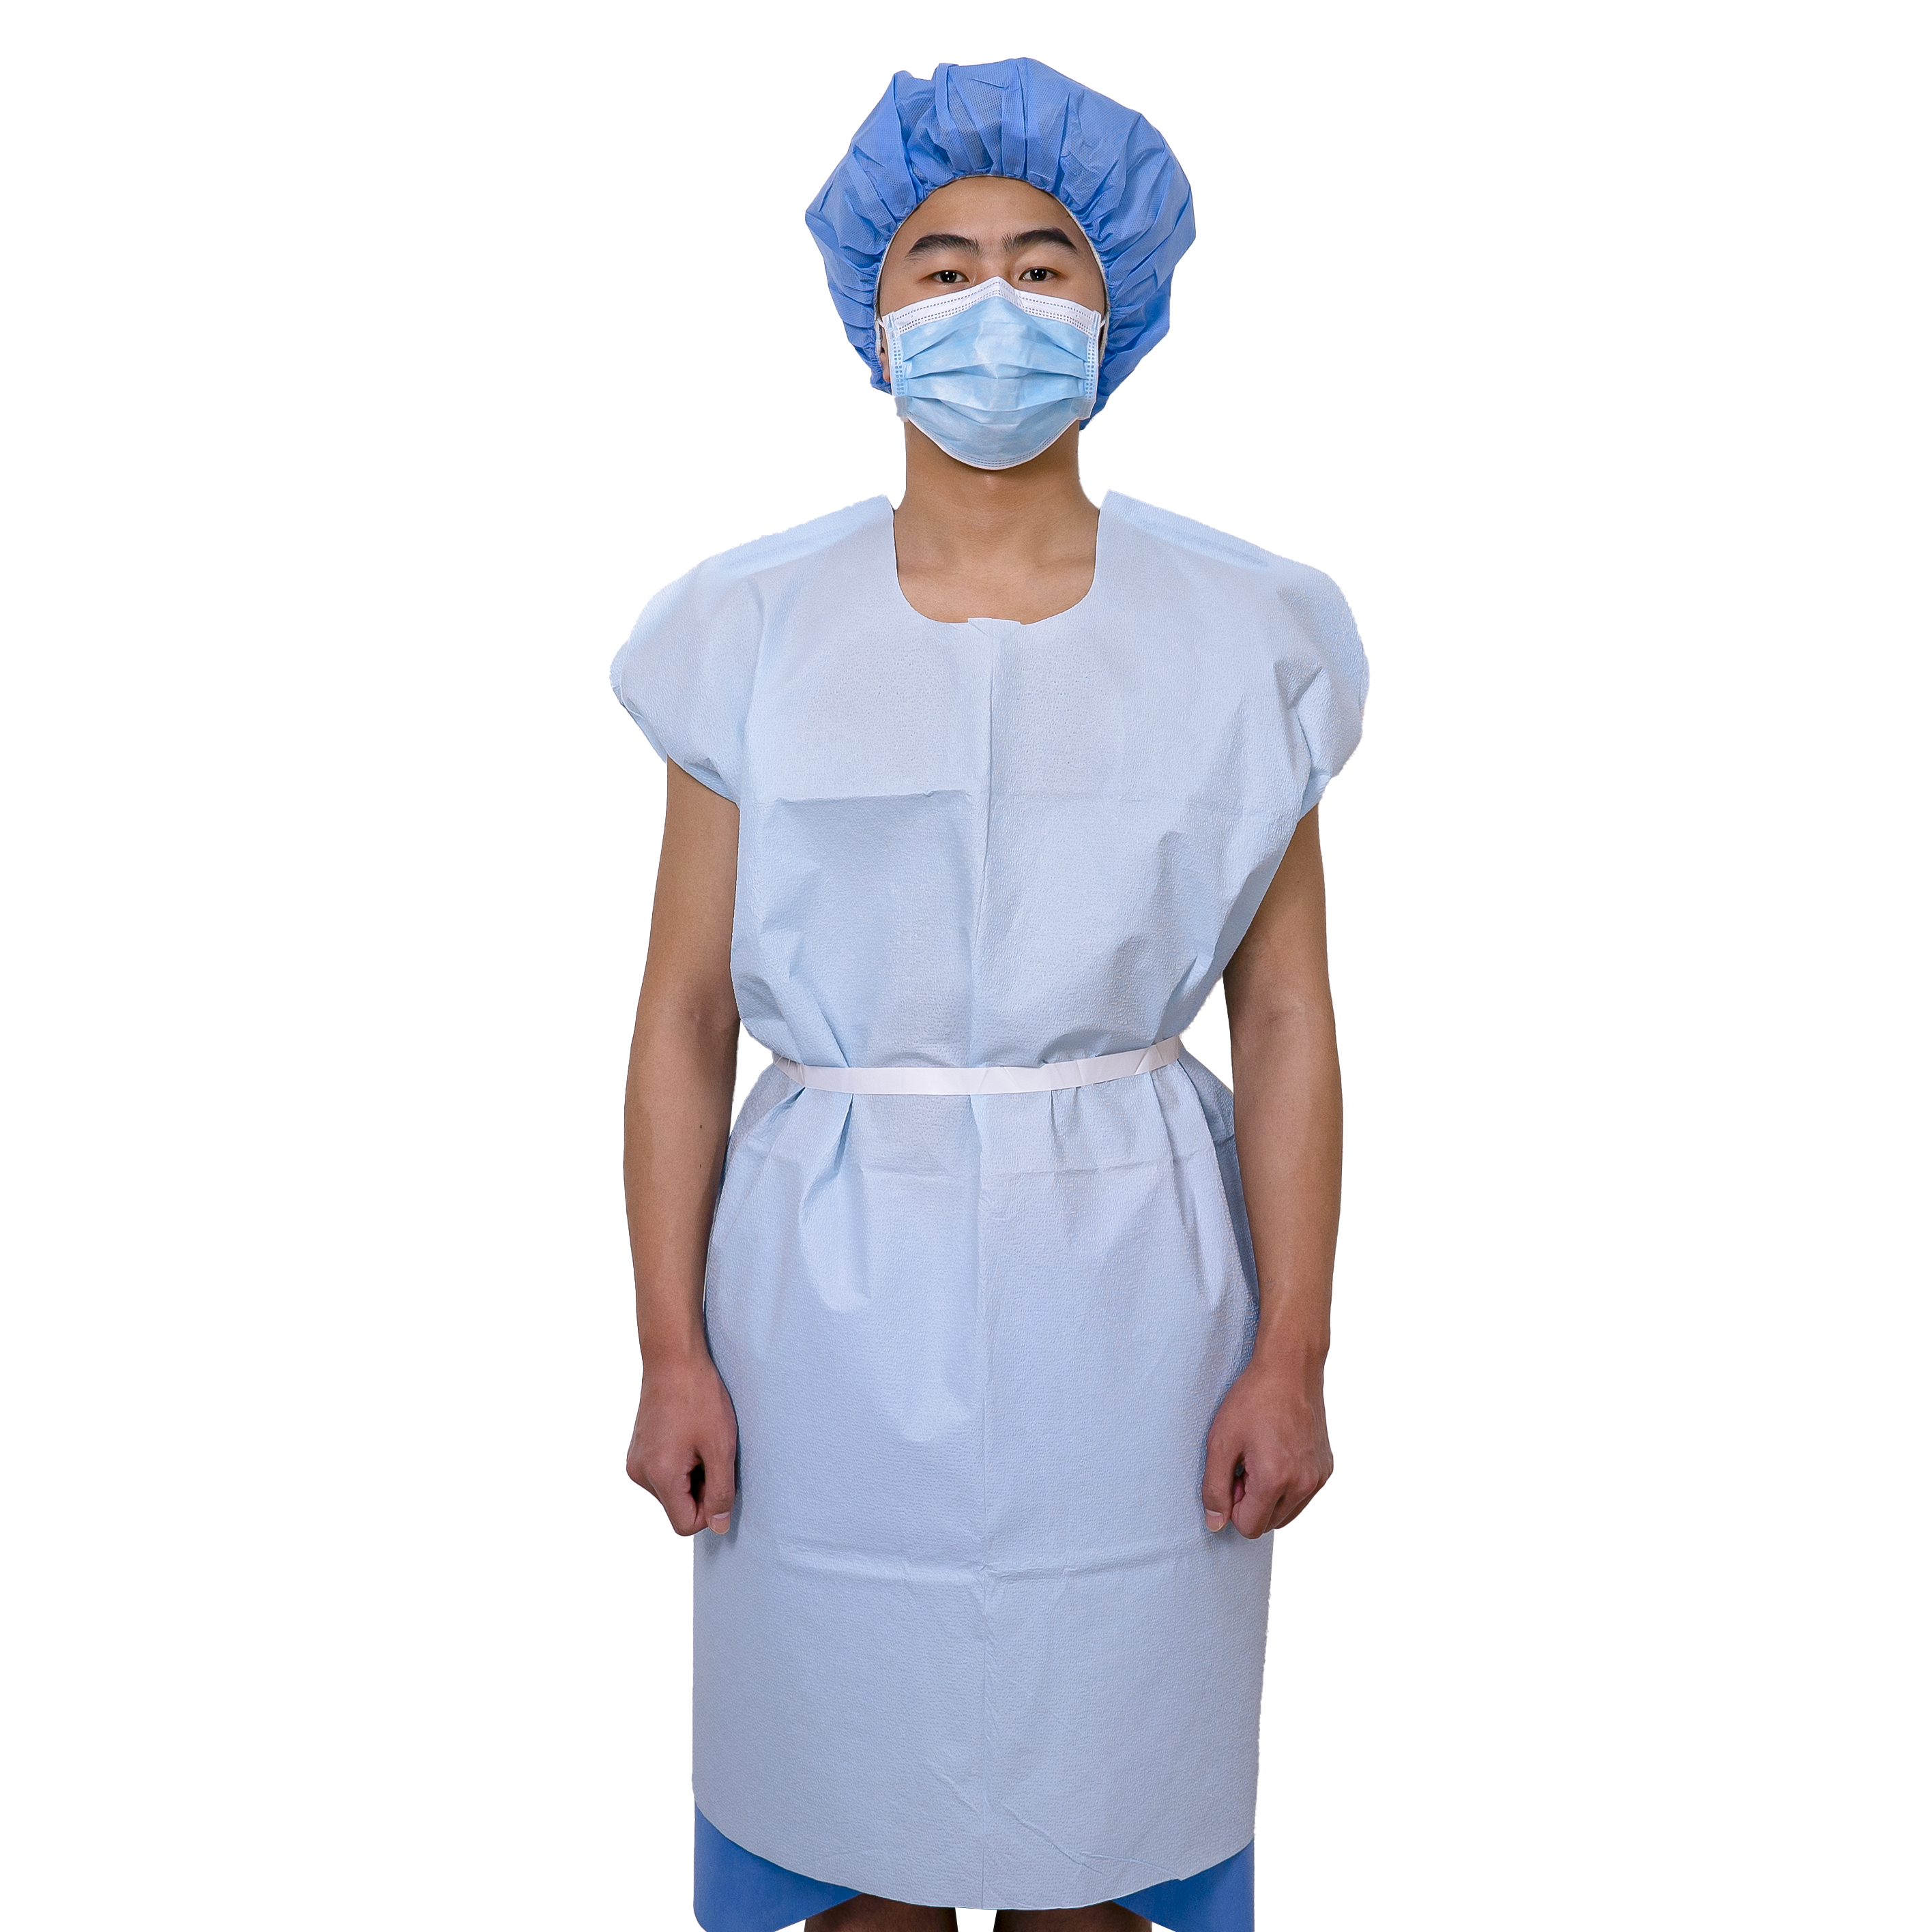 A Comprehensive Guide to Selecting Disposable Patient Gowns